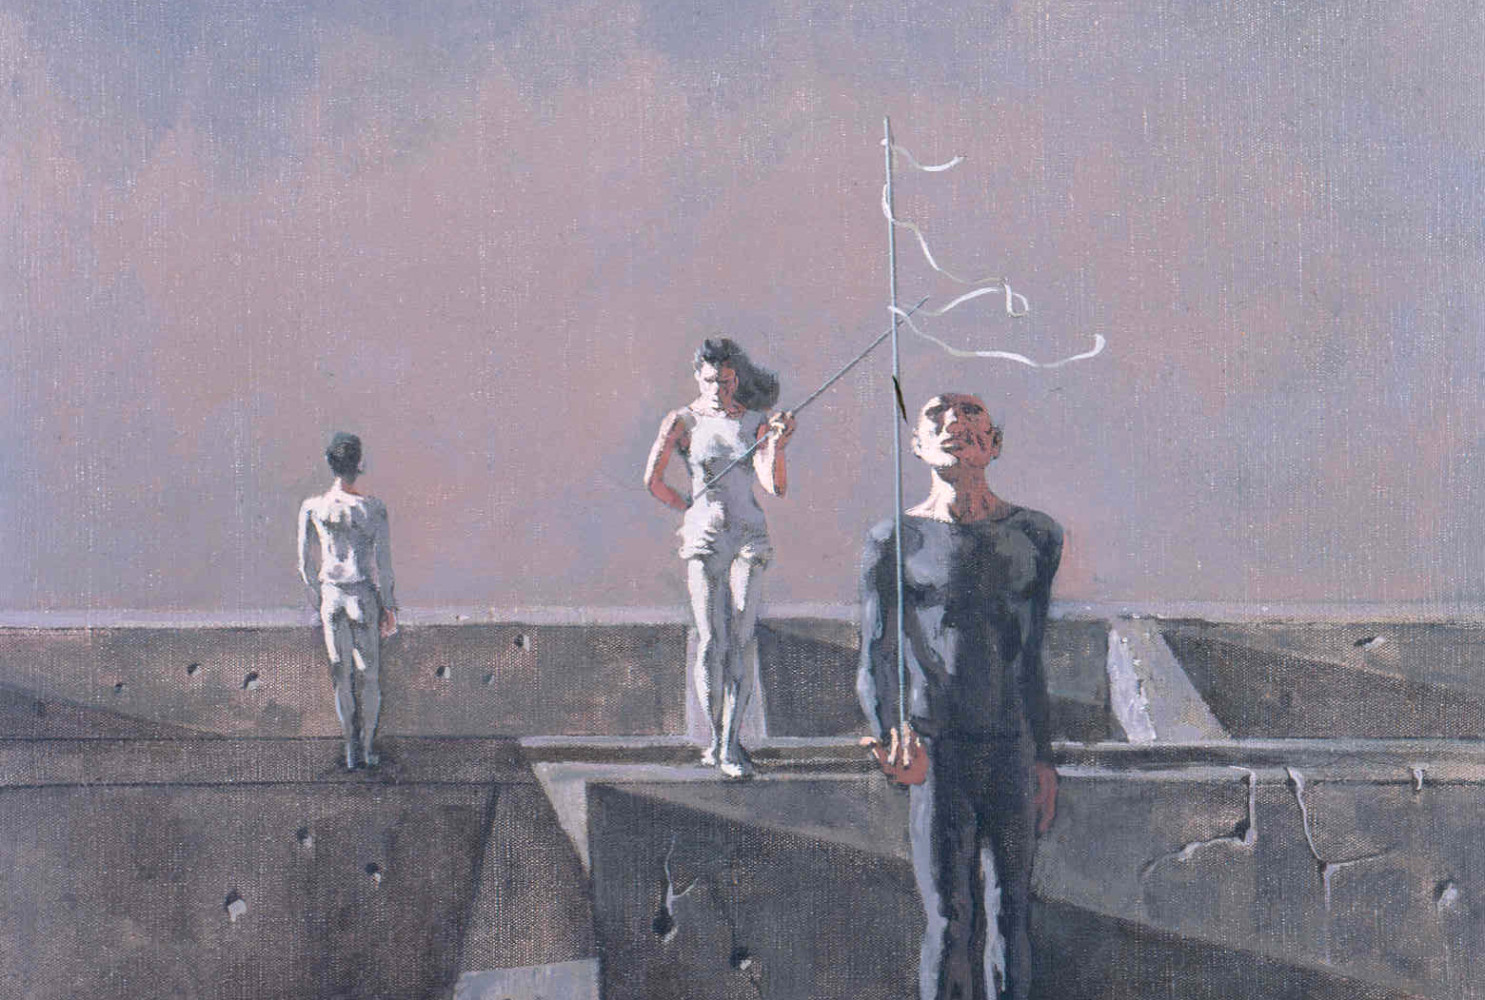 The Jugglers, 1960-68; By Hughie Lee-Smith (1915-1999); Oil on canvas; 26 x 26 inches
